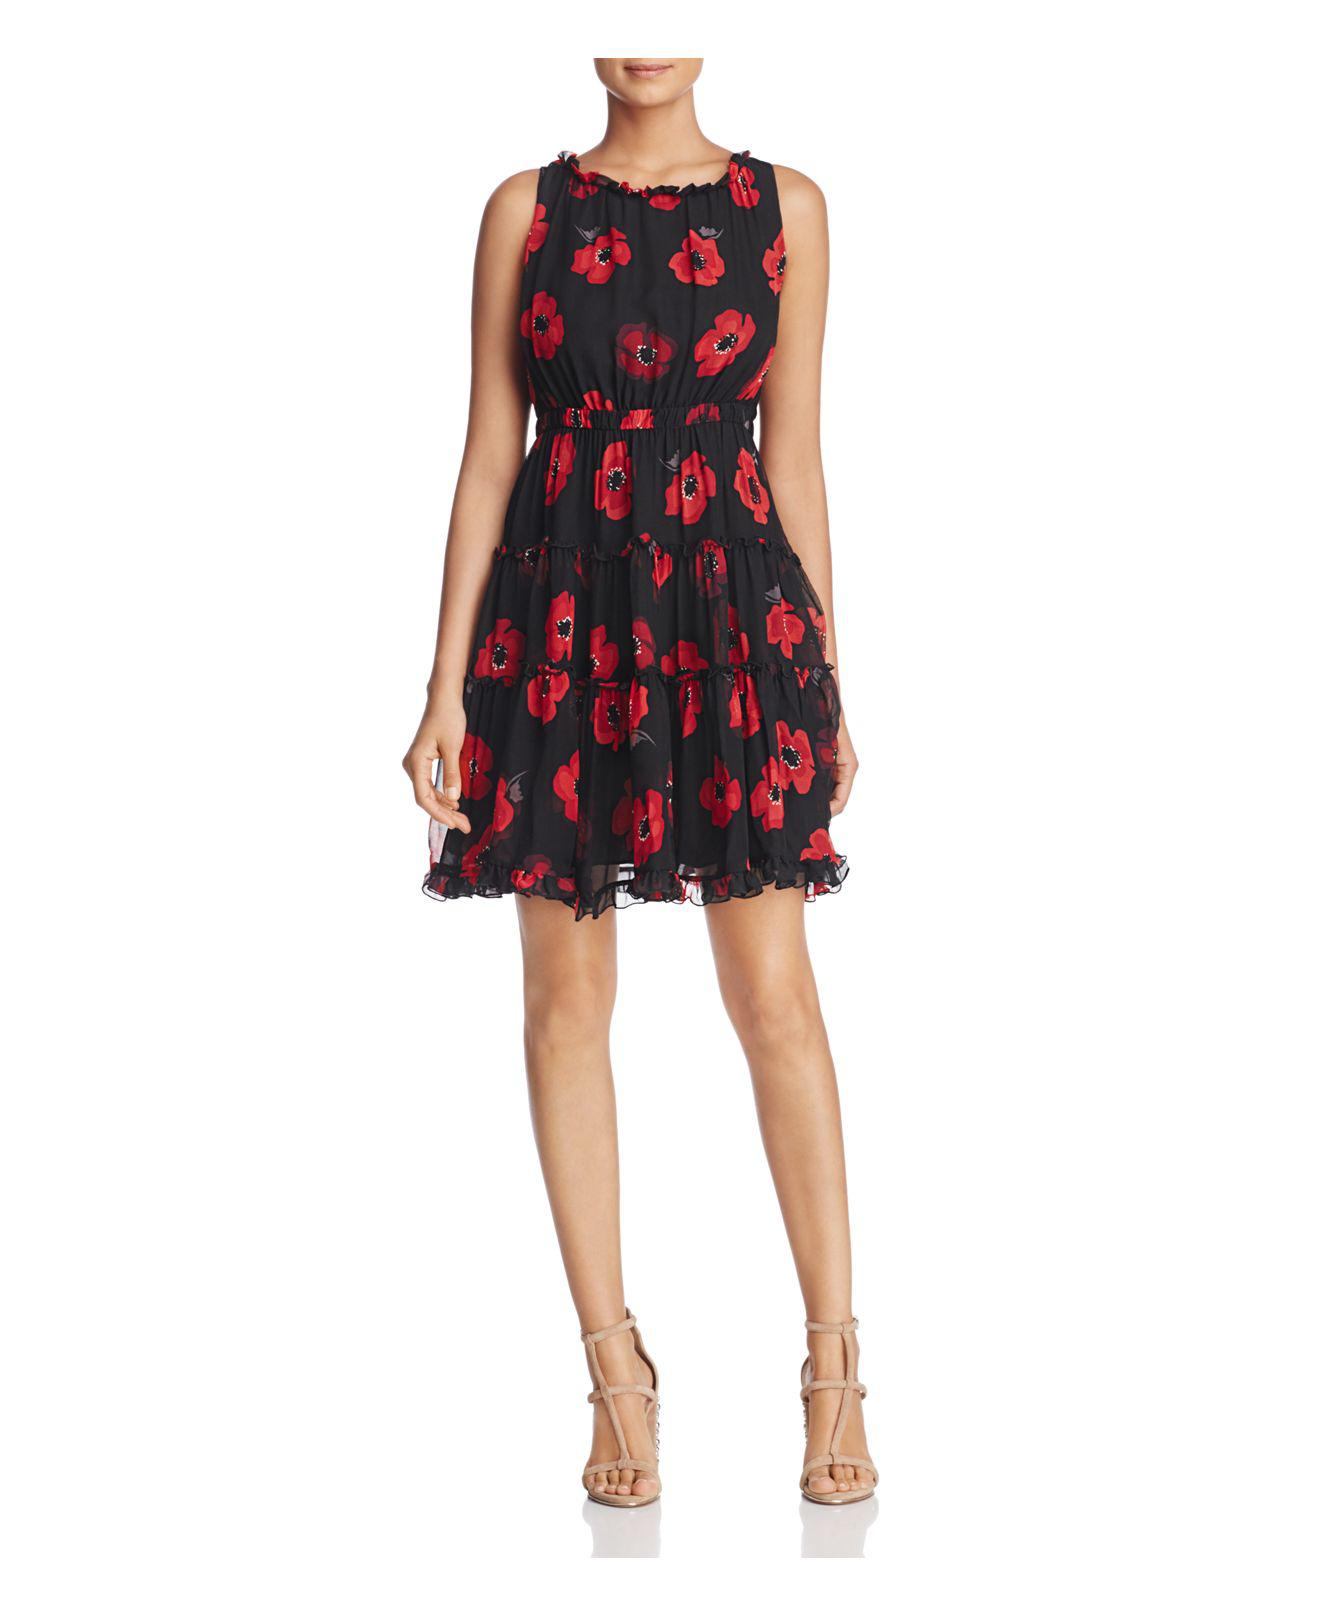 black dress with poppies